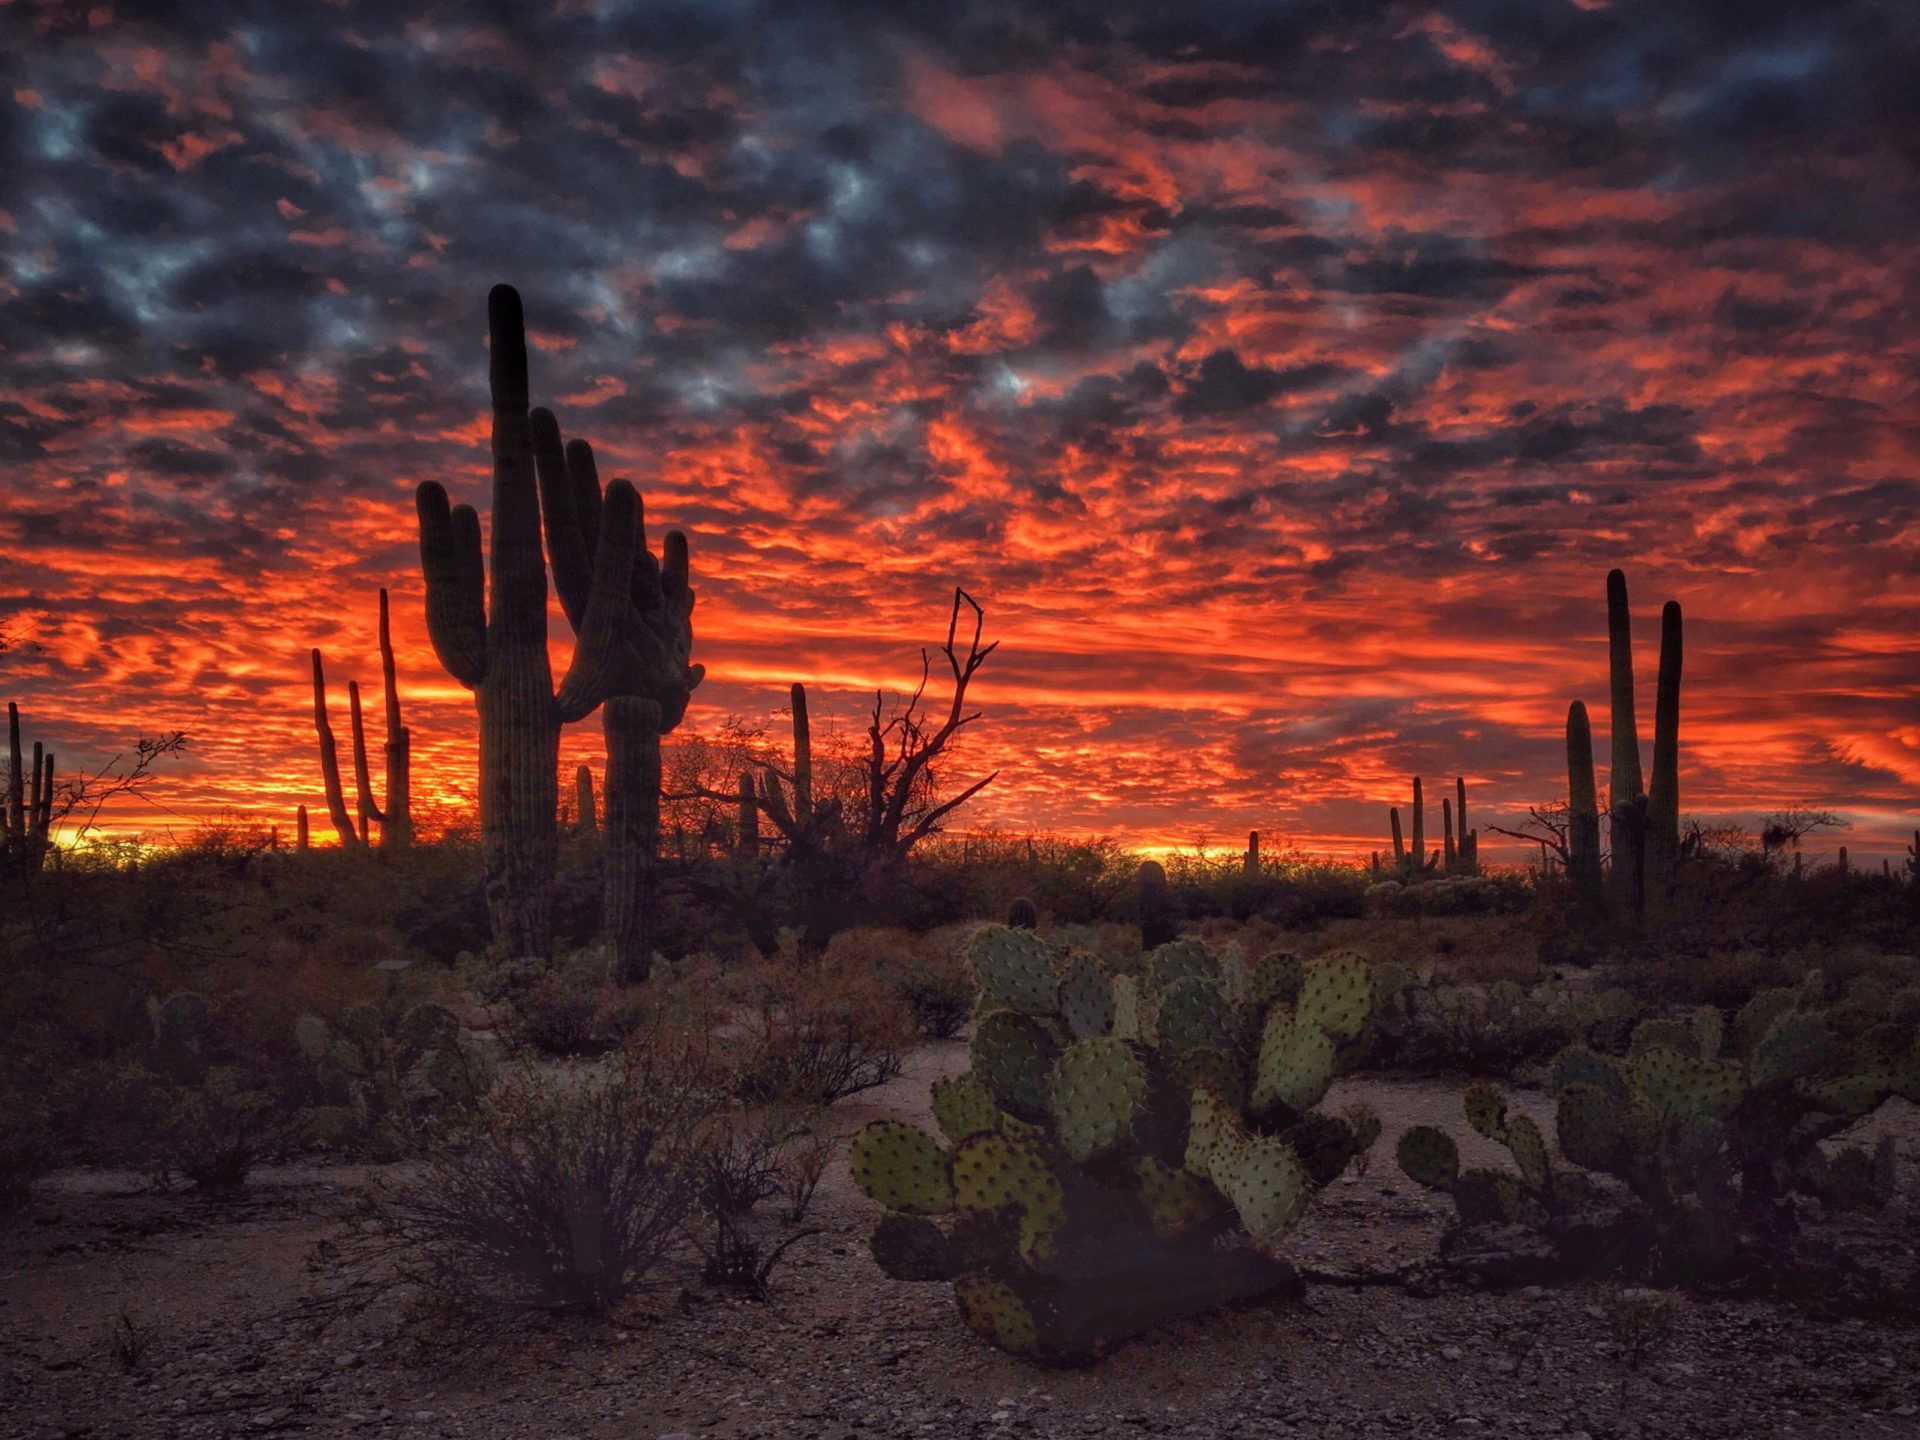 A beautiful desert sunset with clouds and cacti. - Sunset, landscape, desert